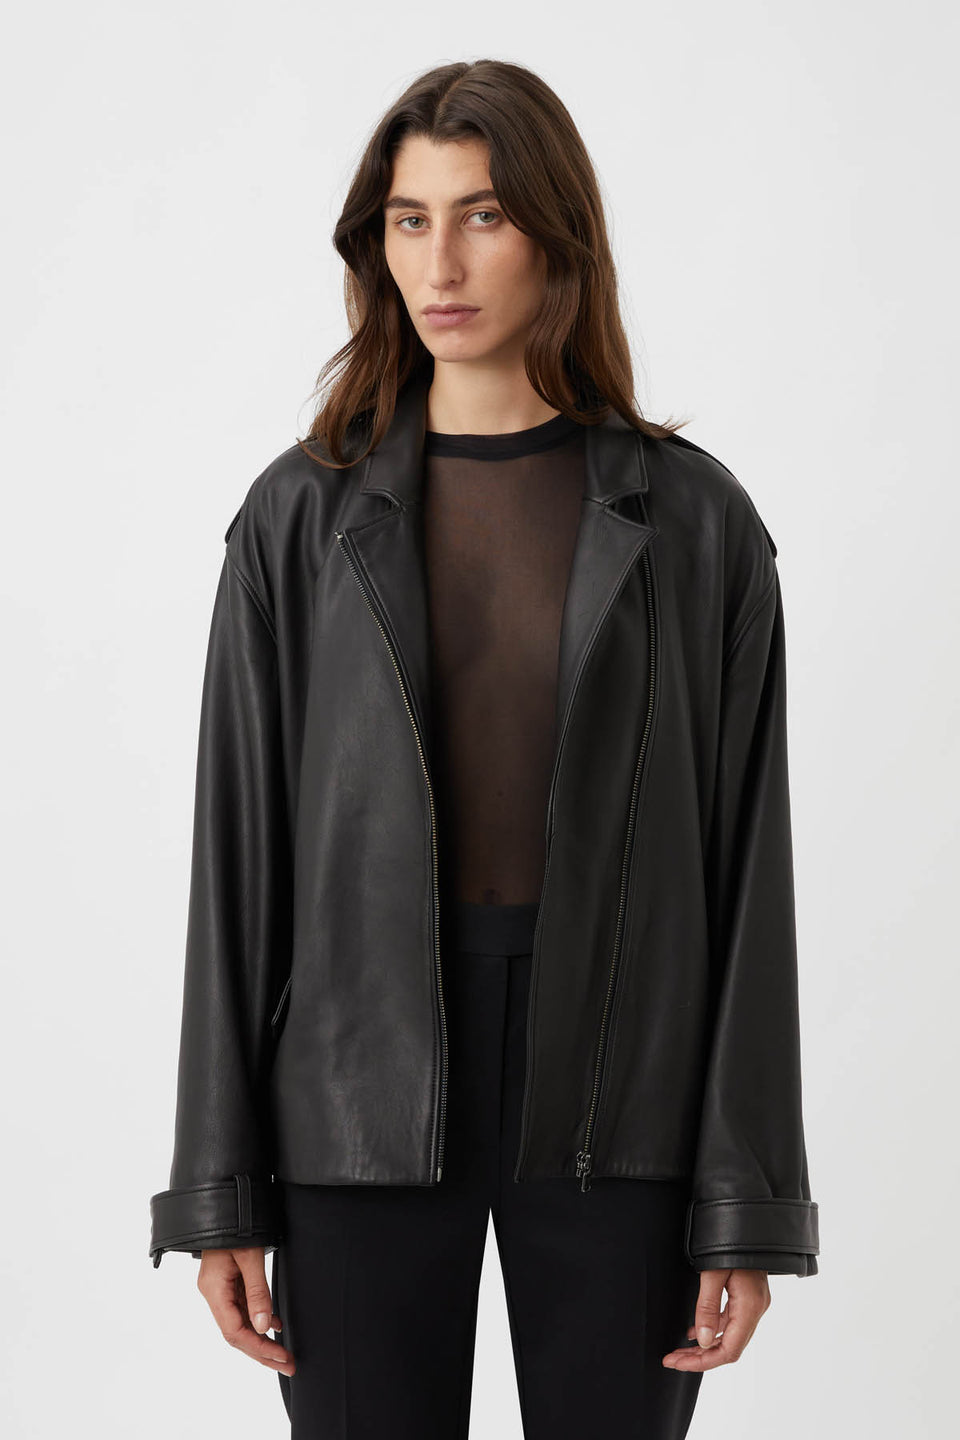 Women's Leather Jackets, Skirts & Pants - CAMILLA AND MARC® Official | C&M